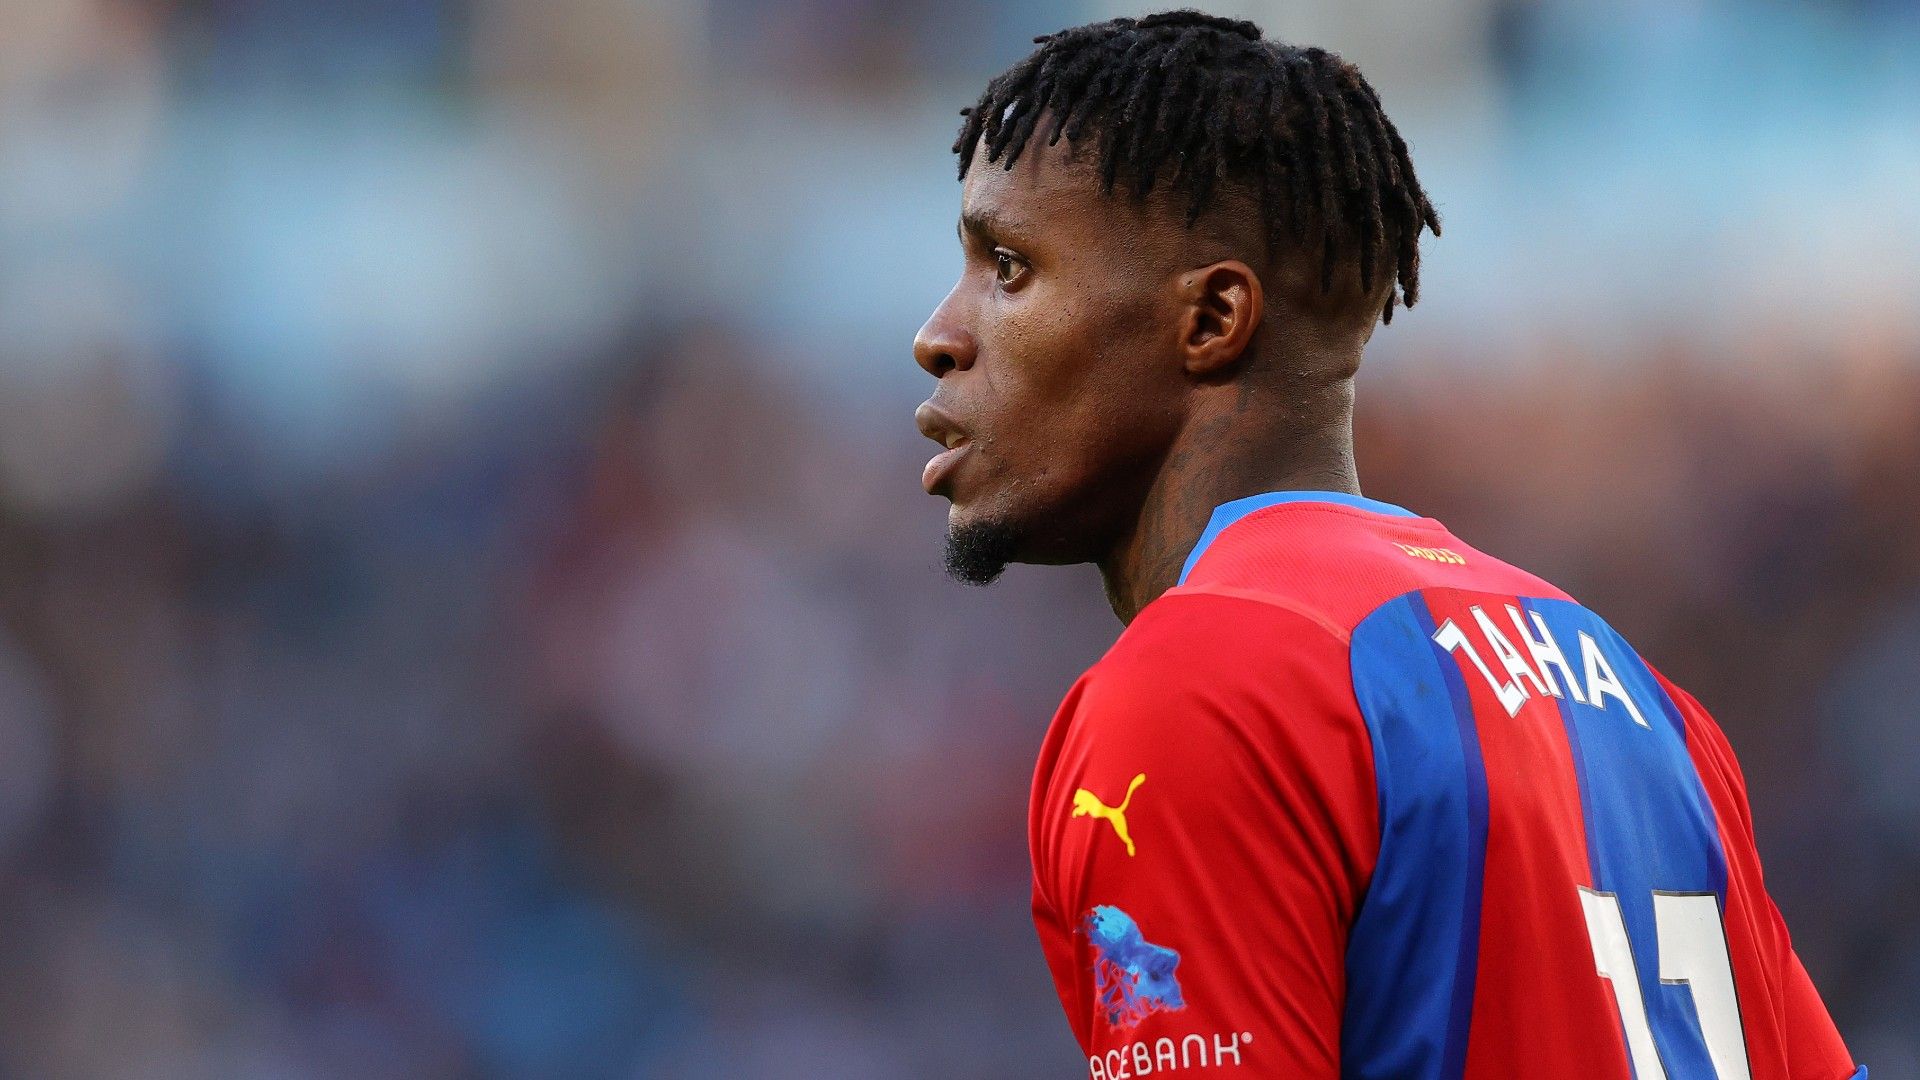 Crystal Palace player Wilfried Zaha critical of Instagram over racism